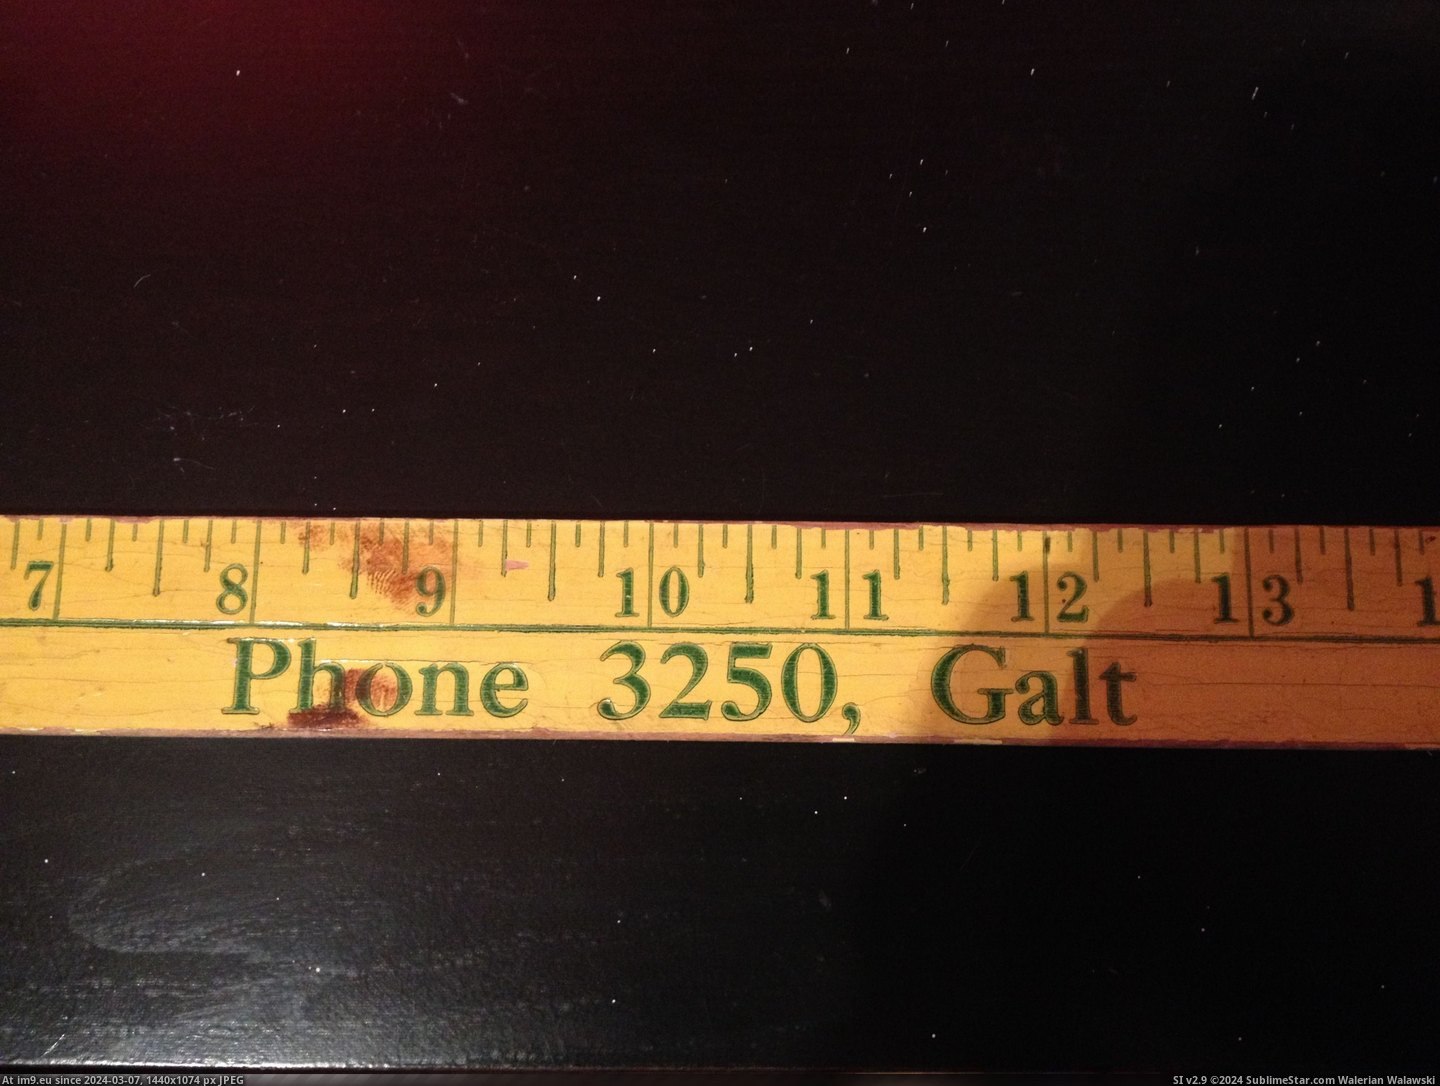 #Phone #Digit #Yardstick #Number [Mildlyinteresting] Found a yardstick from 1909 with a 4 digit phone number on it Pic. (Image of album My r/MILDLYINTERESTING favs))